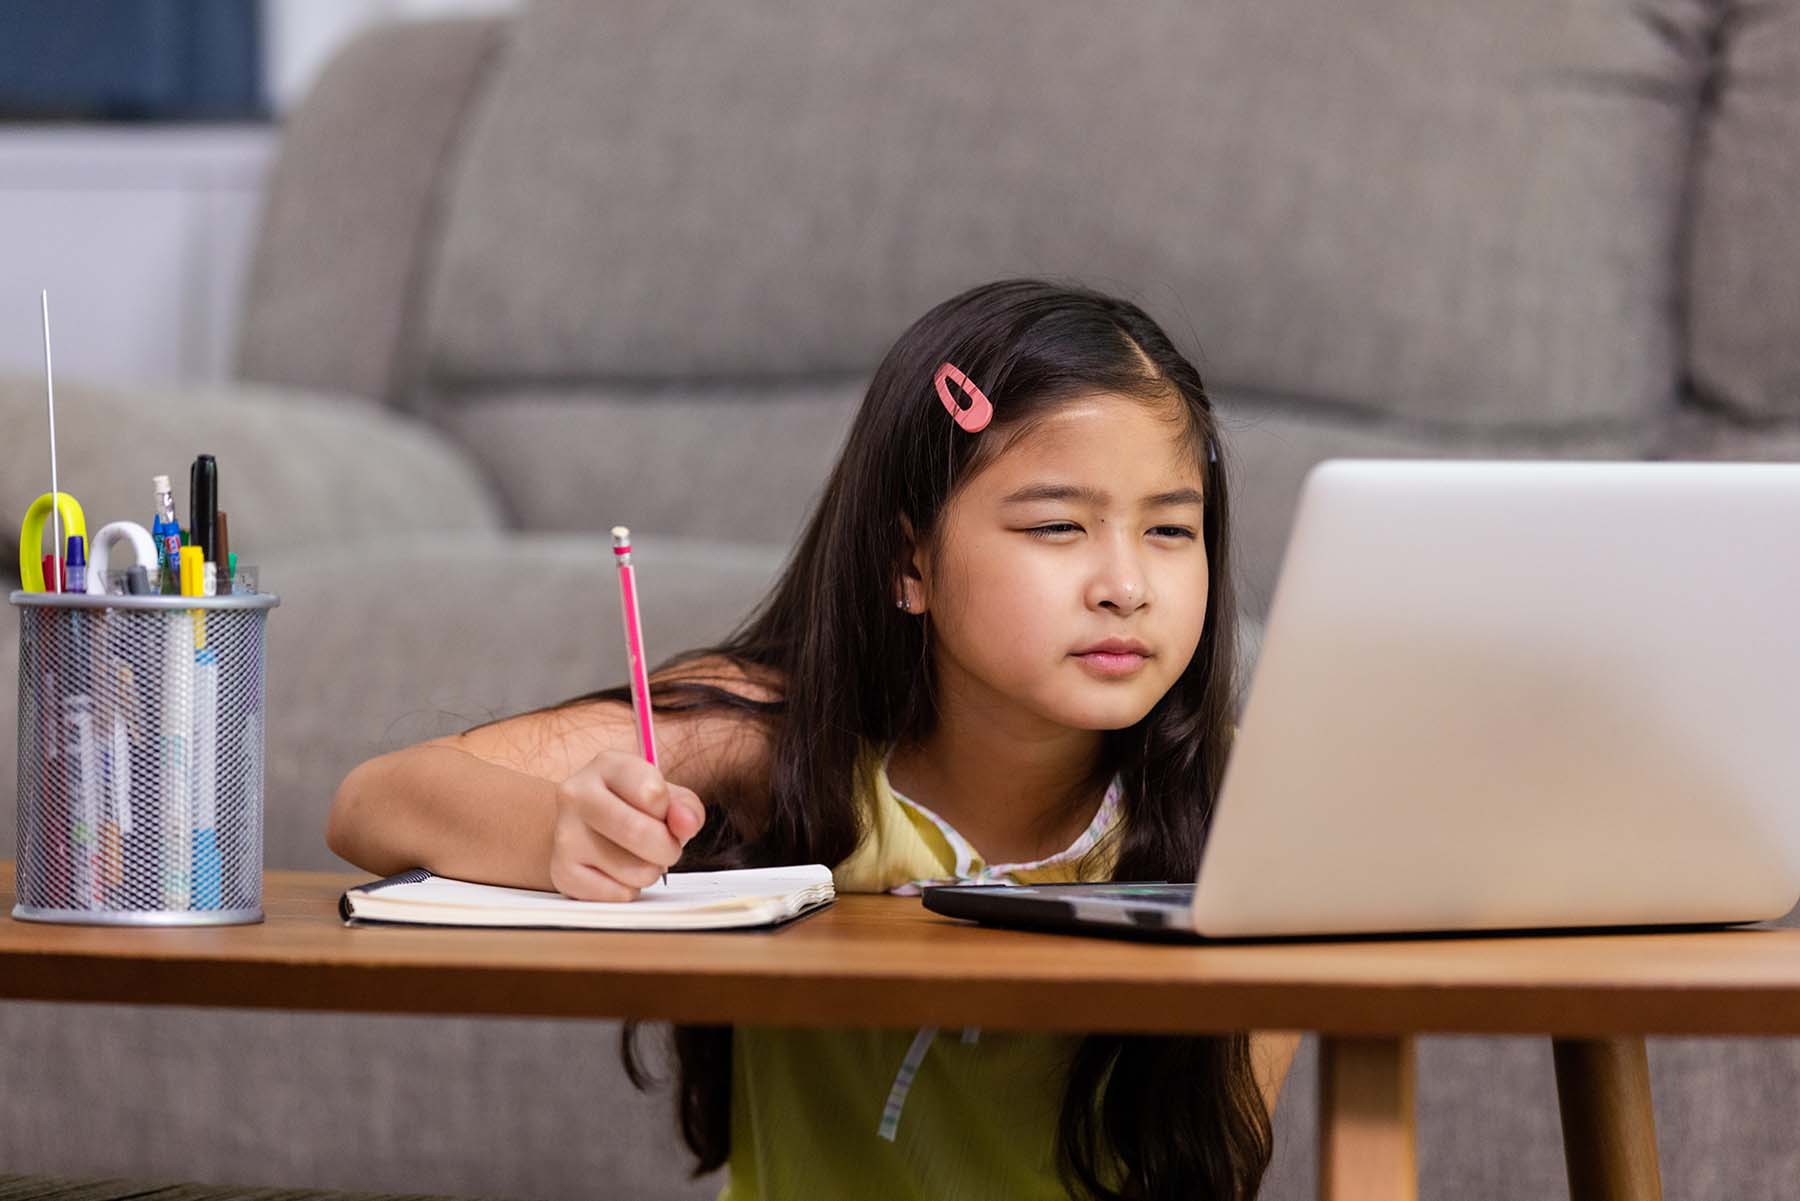 Little girl squints at computer screen while doing her homework.